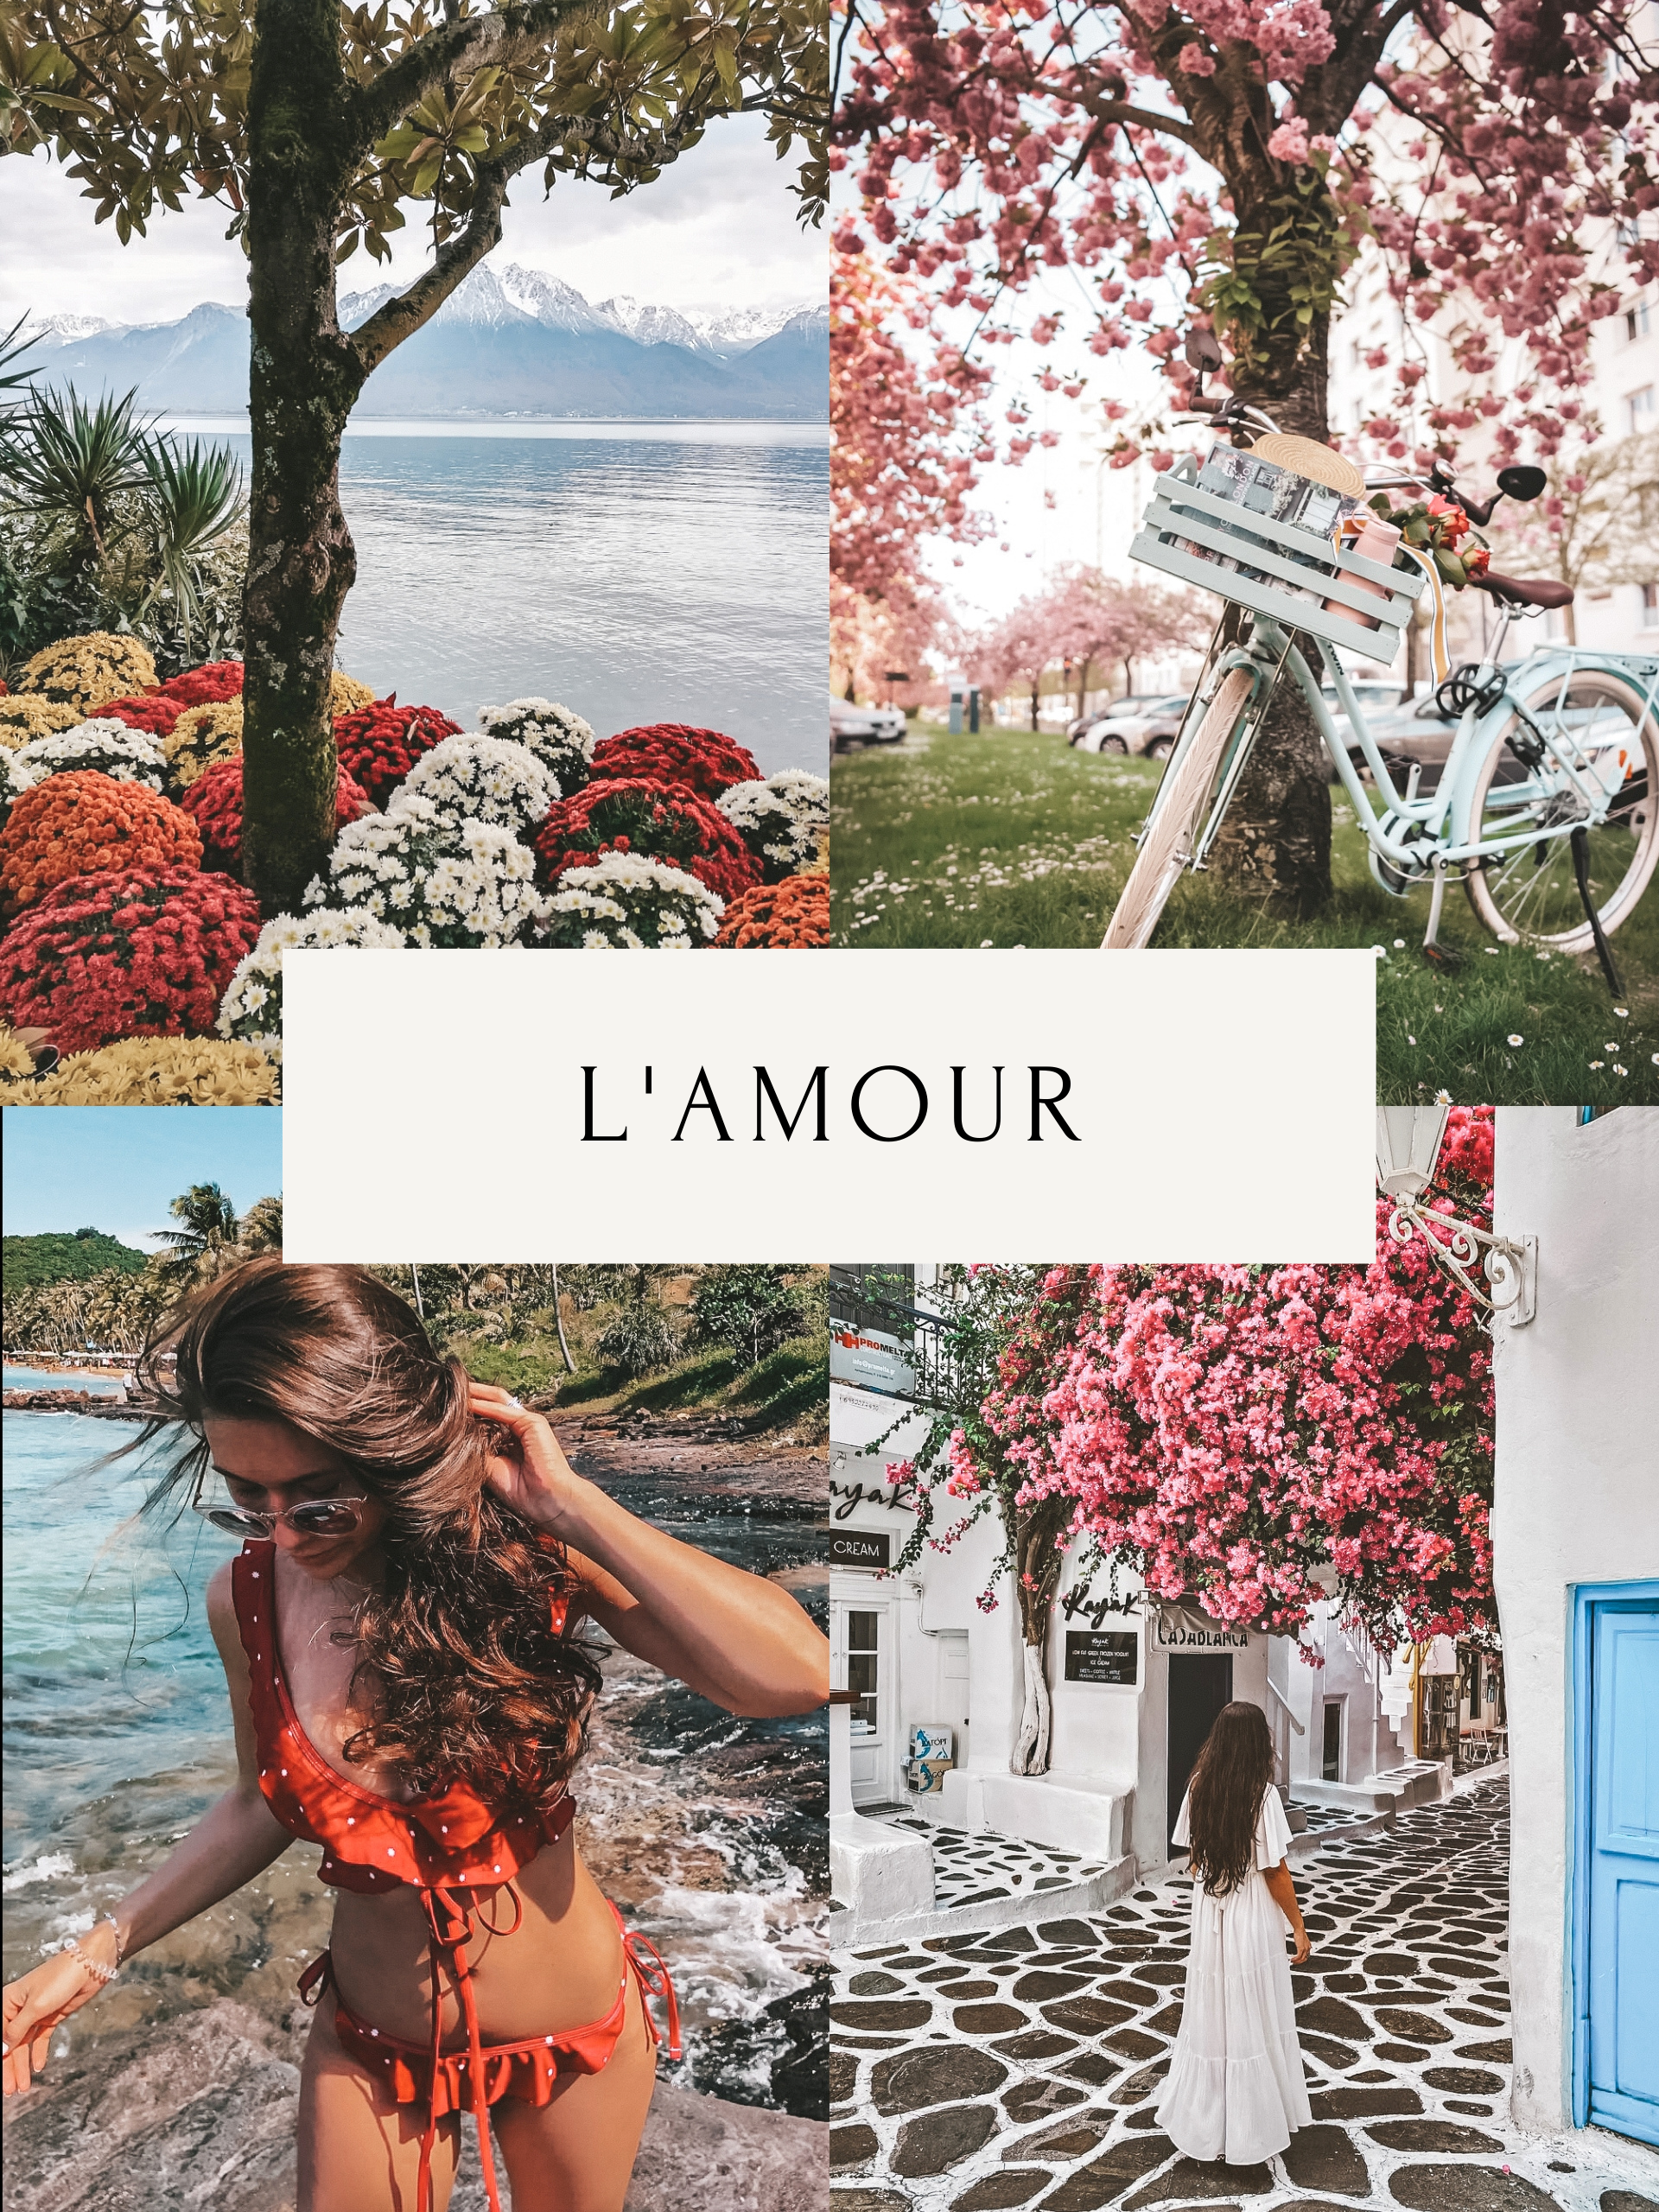 L'amour - One Click Filter